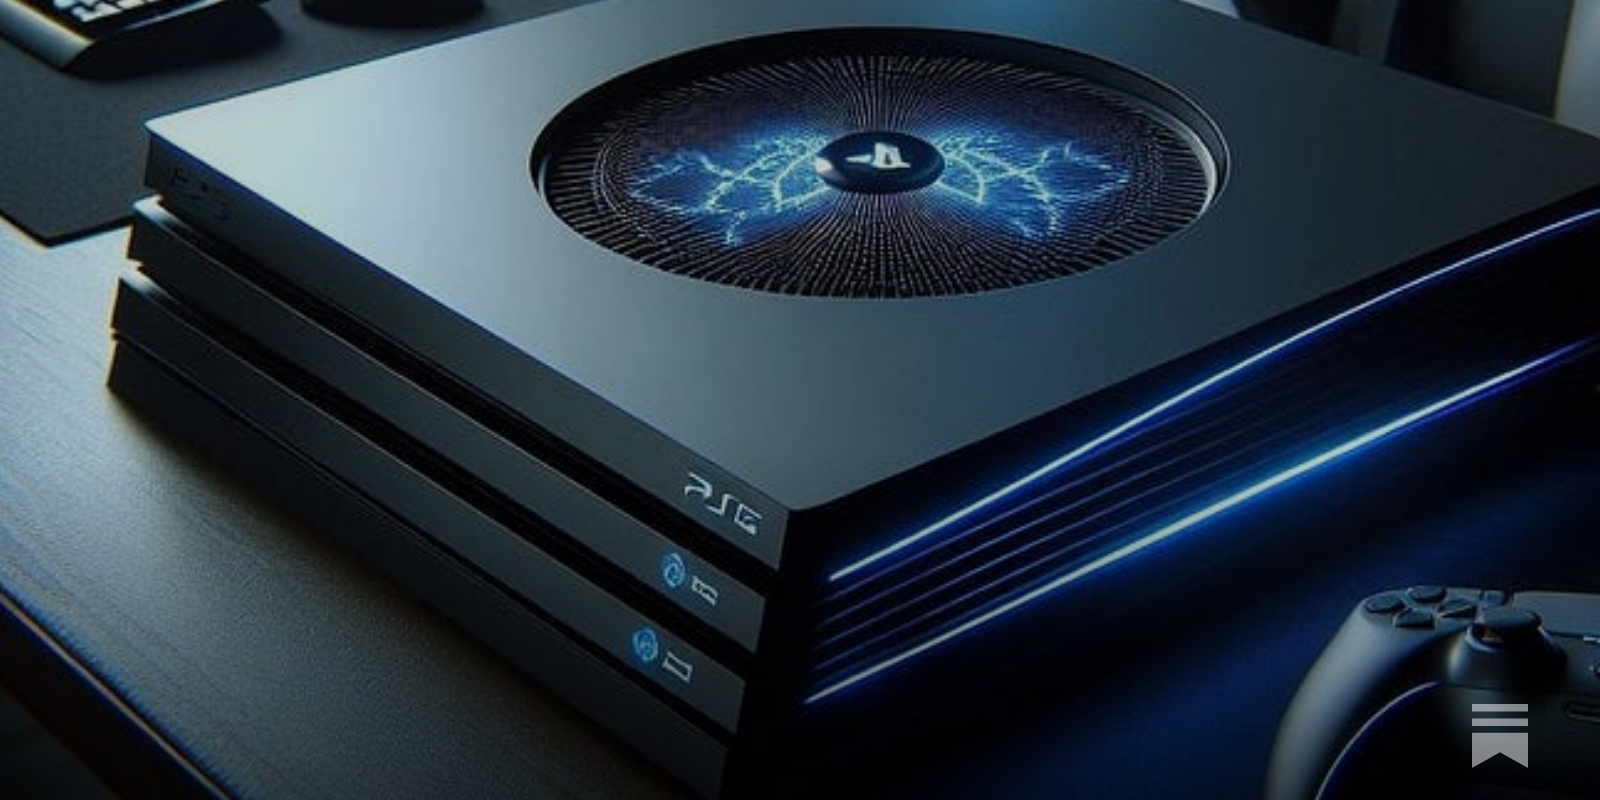 PS5 Pro expected release date, specs, price, and more